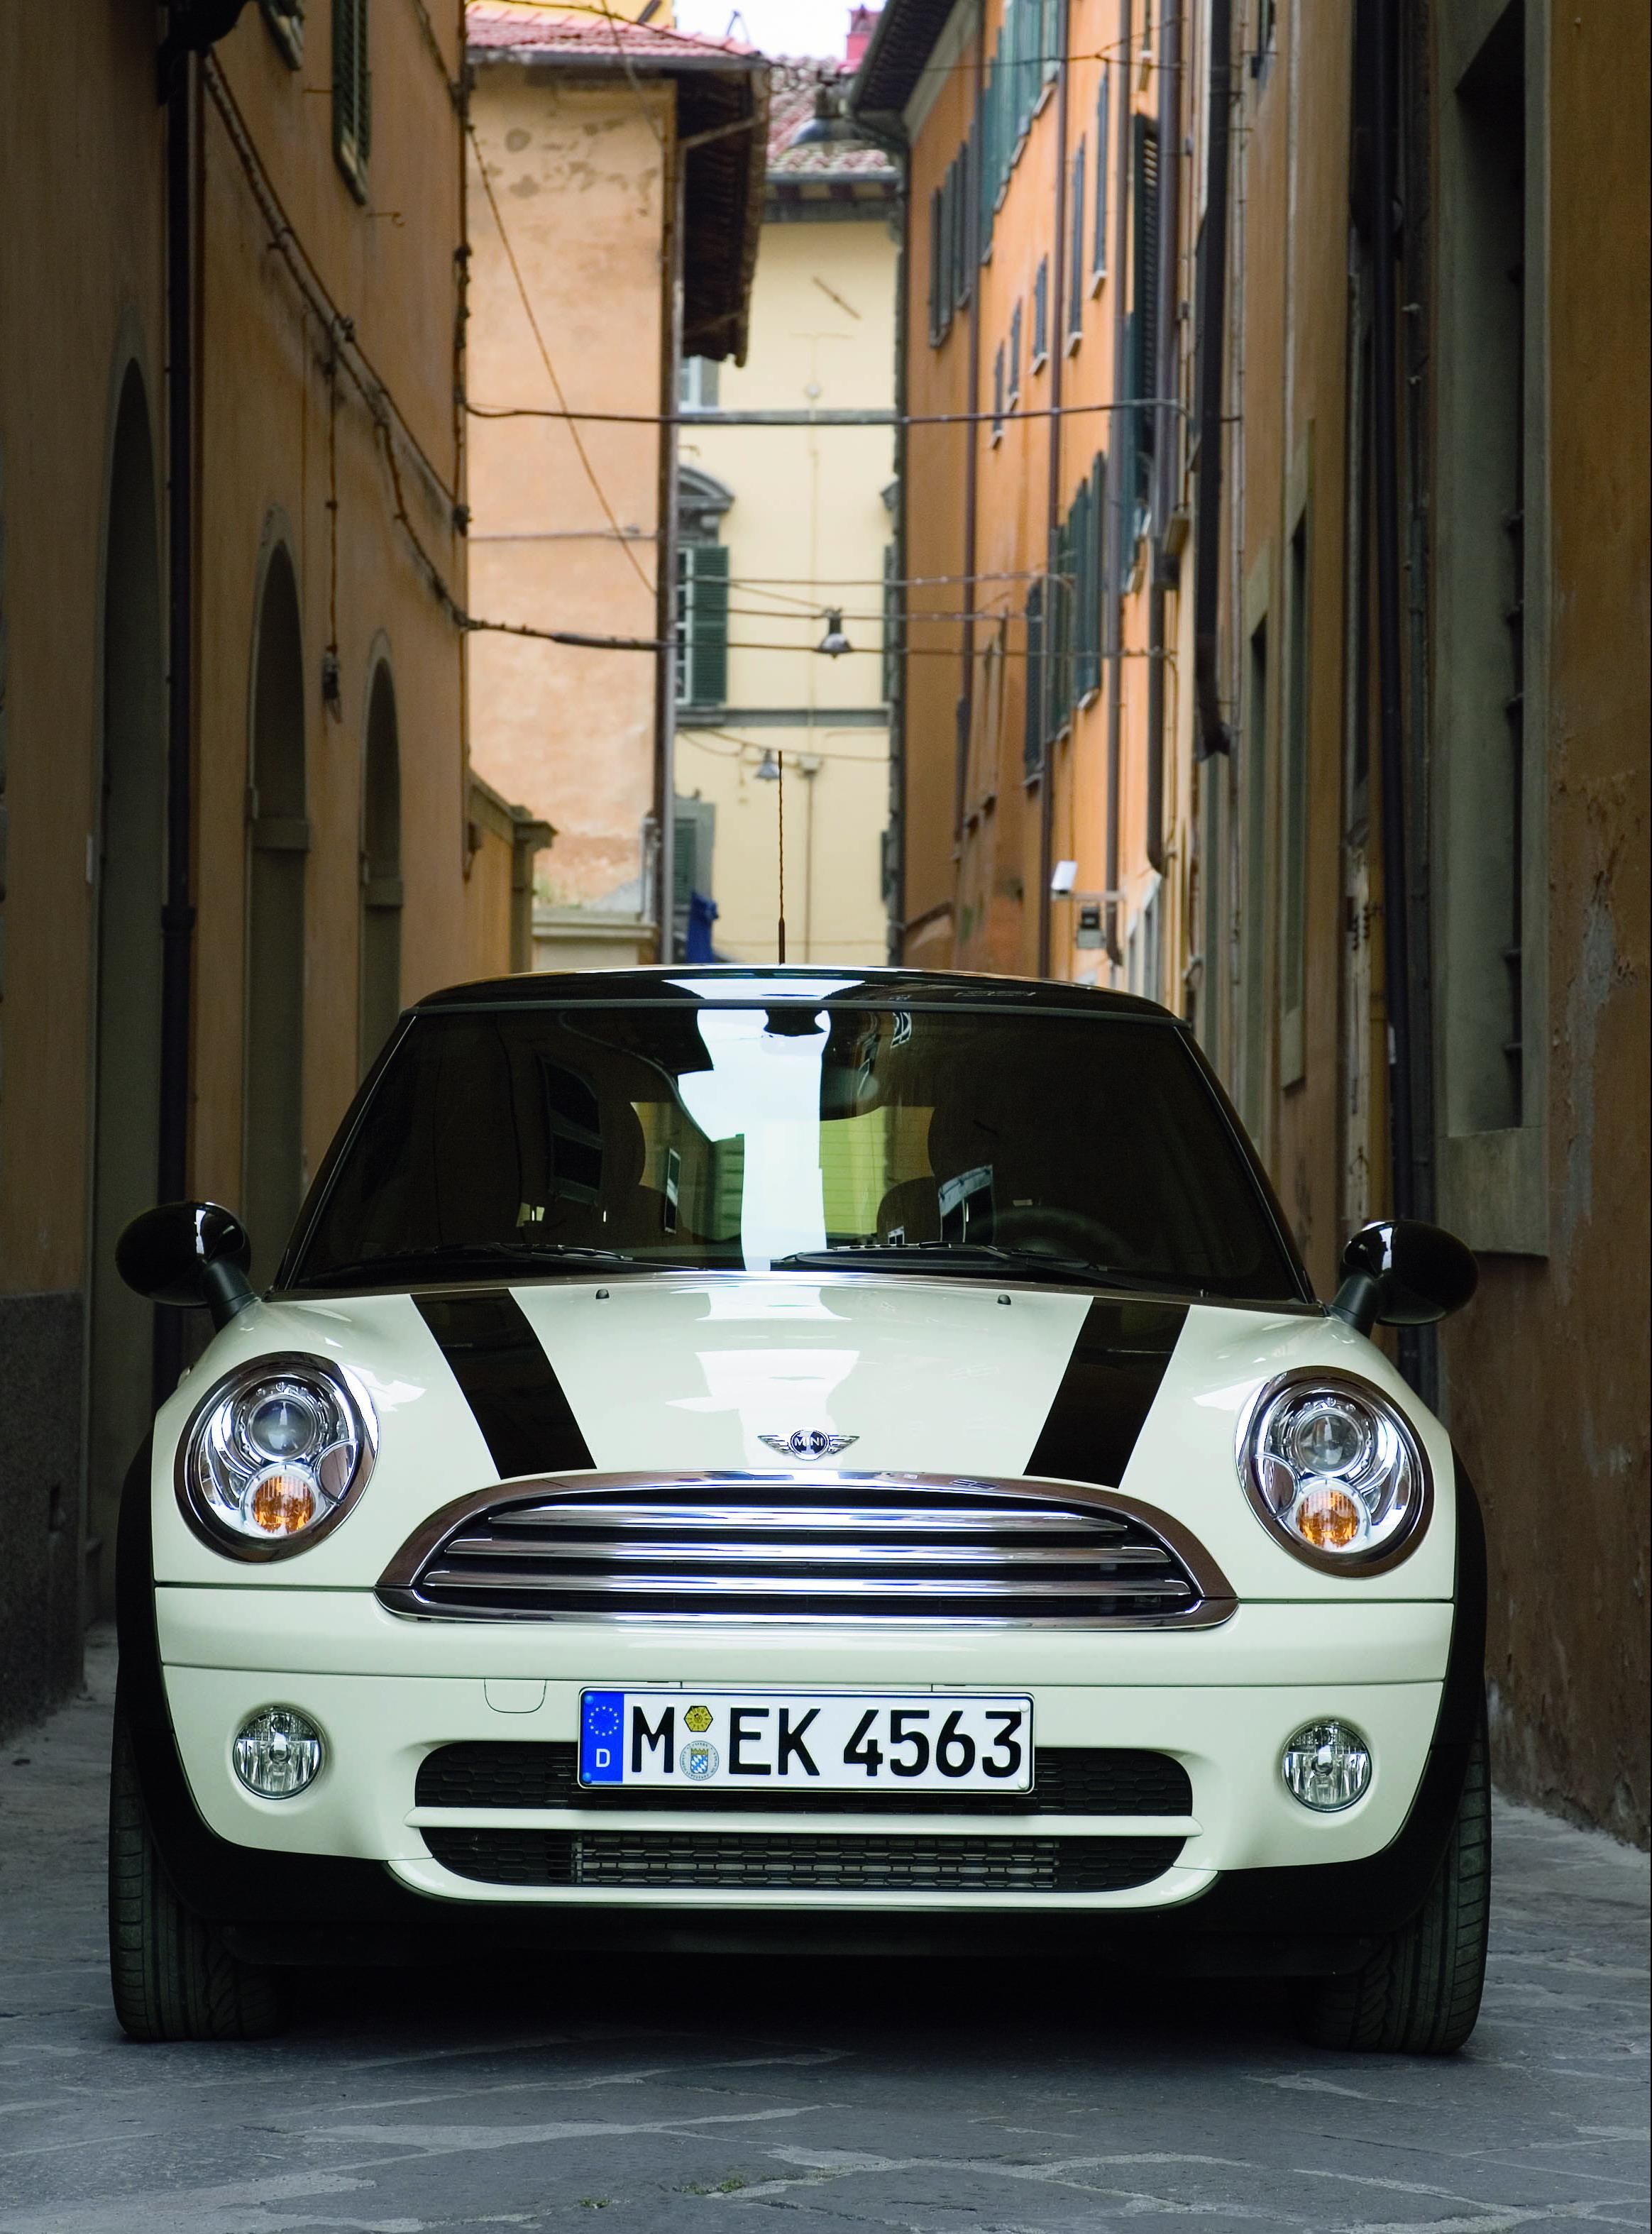 2007 MINI One and MINI Cooper D with 95Hp 1.4 petrol & 110Hp 1.6  Turbo-diesel engines